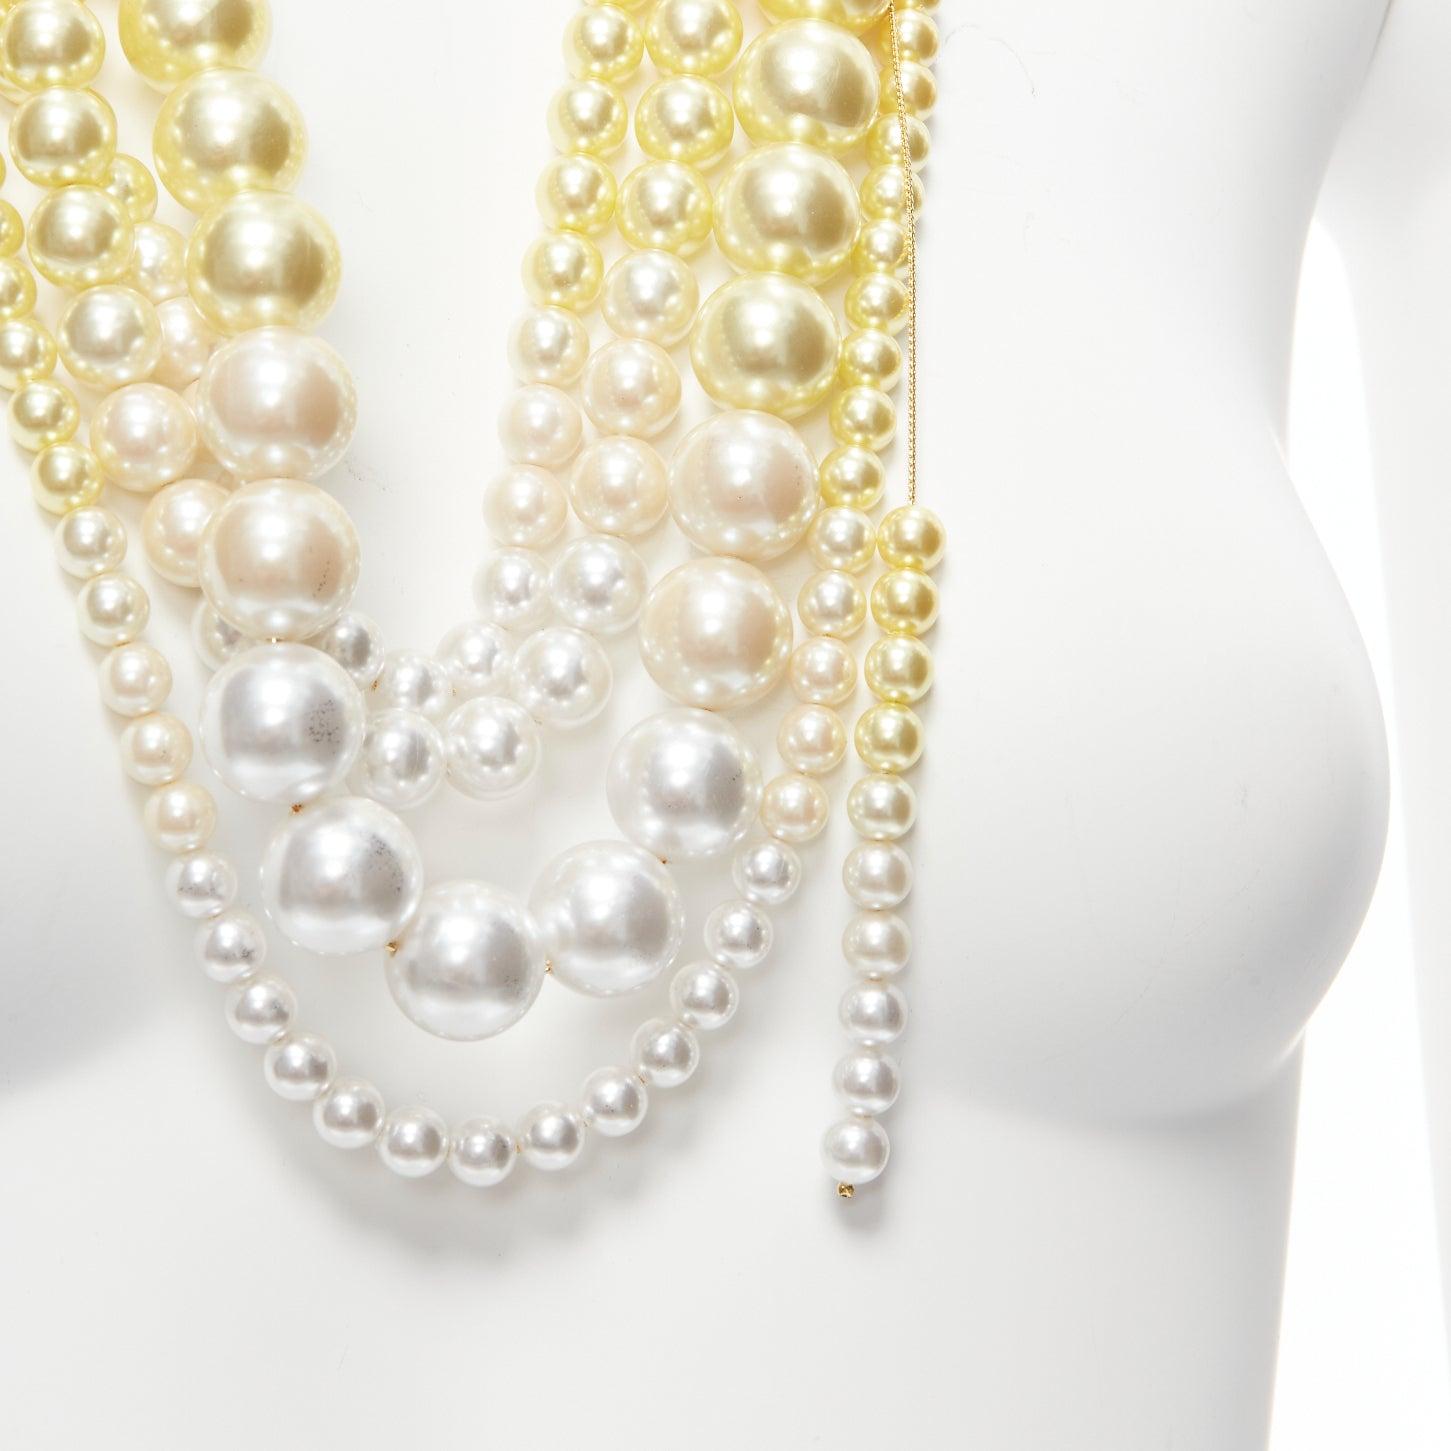 TOGA ARCHIVES yellow white ombre tiered faux pearl statement necklace
Reference: BSHW/A00062
Brand: Toga Archives
Material: Faux Pearl, Metal
Color: Yellow, White
Pattern: Solid
Closure: Lobster Clasp
Lining: Gold Metal

CONDITION:
Condition: Very